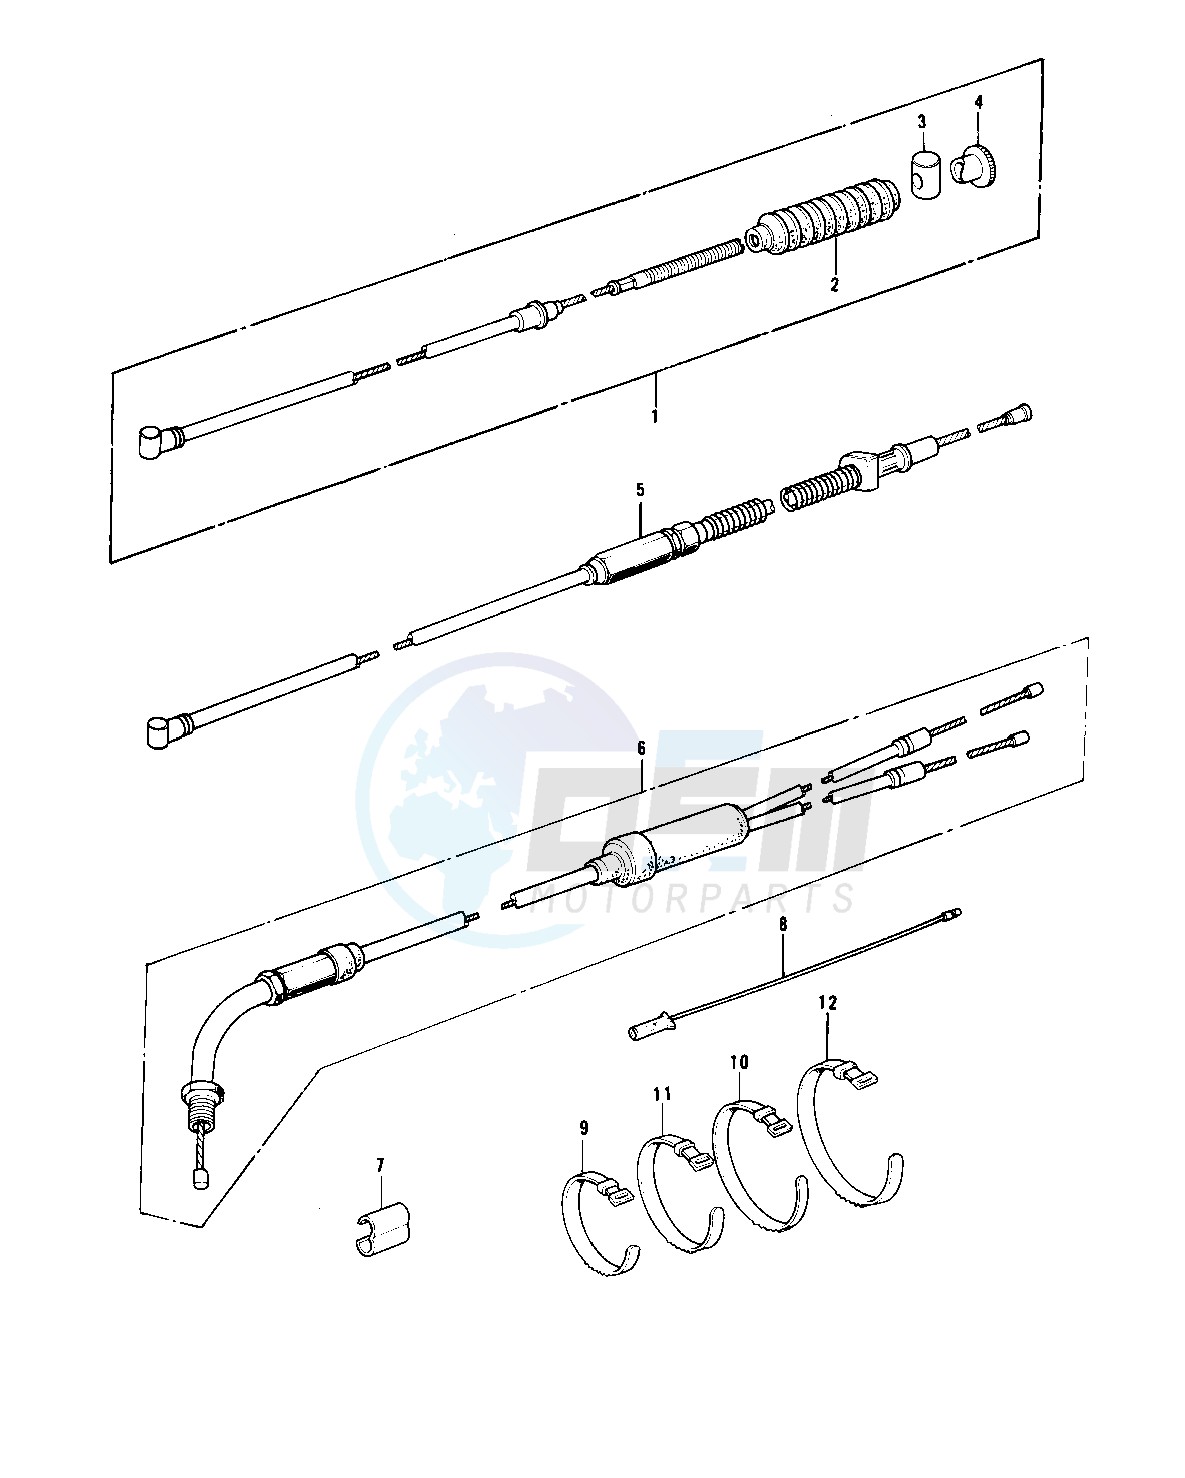 CABLES_CHASSIS ELECTRICAL EQUIPMENT blueprint